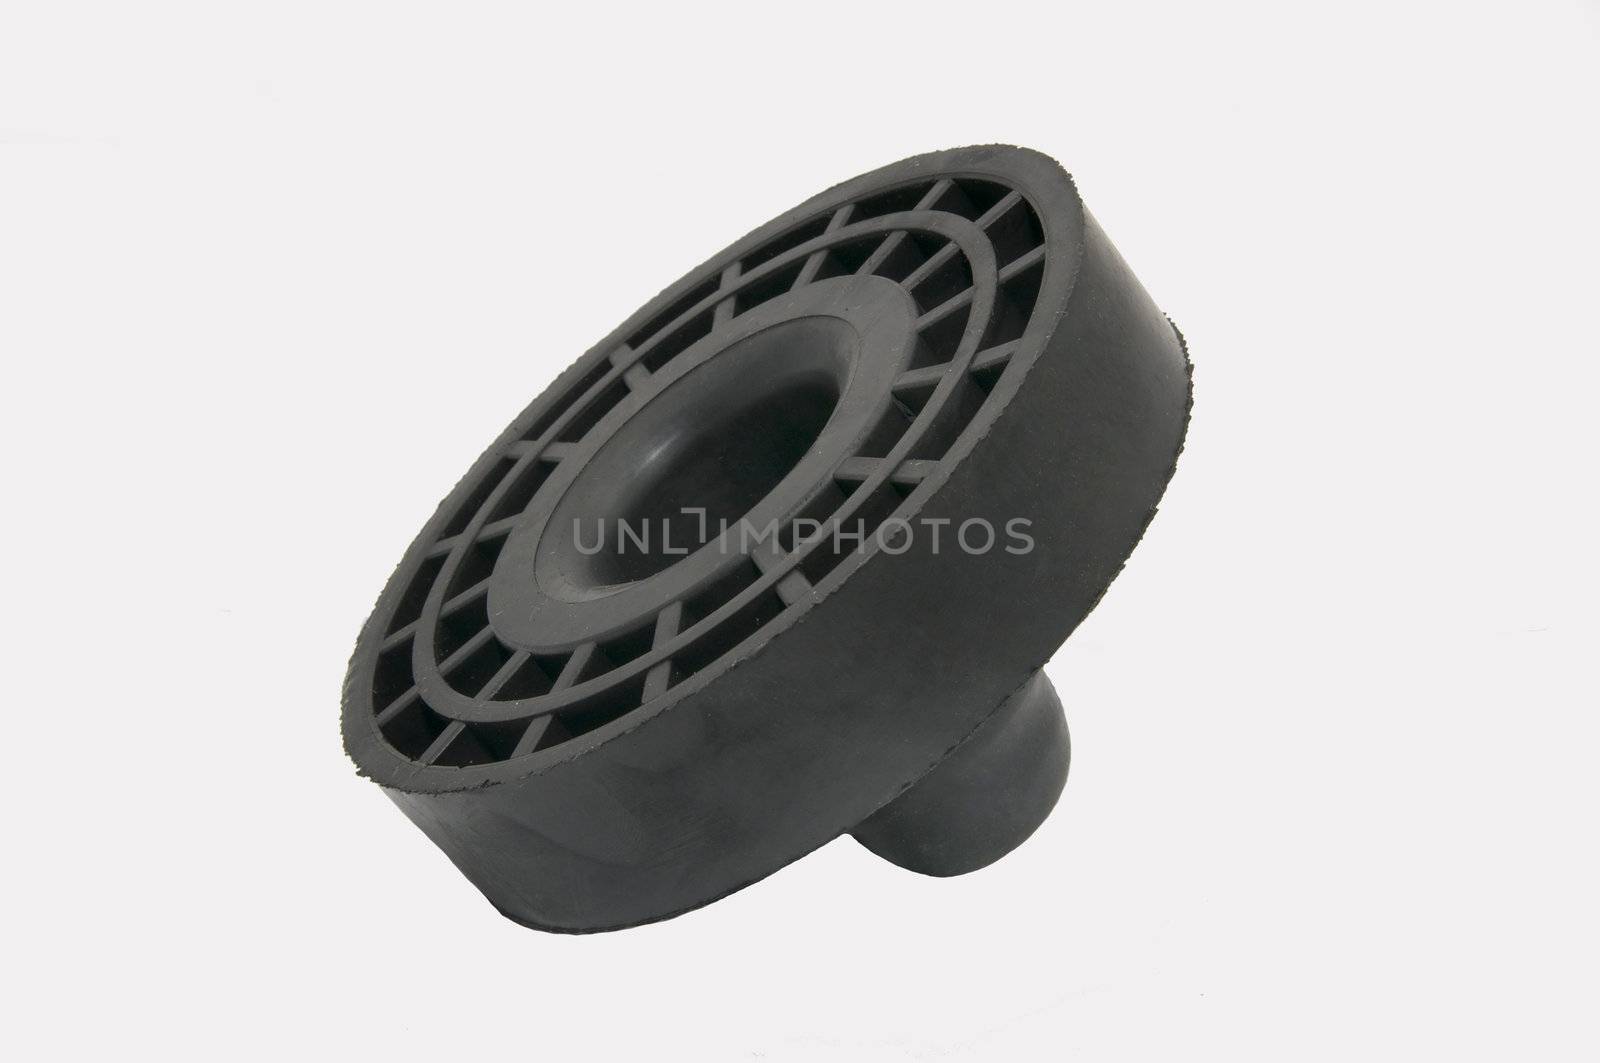 rubber parts to the car on a white background